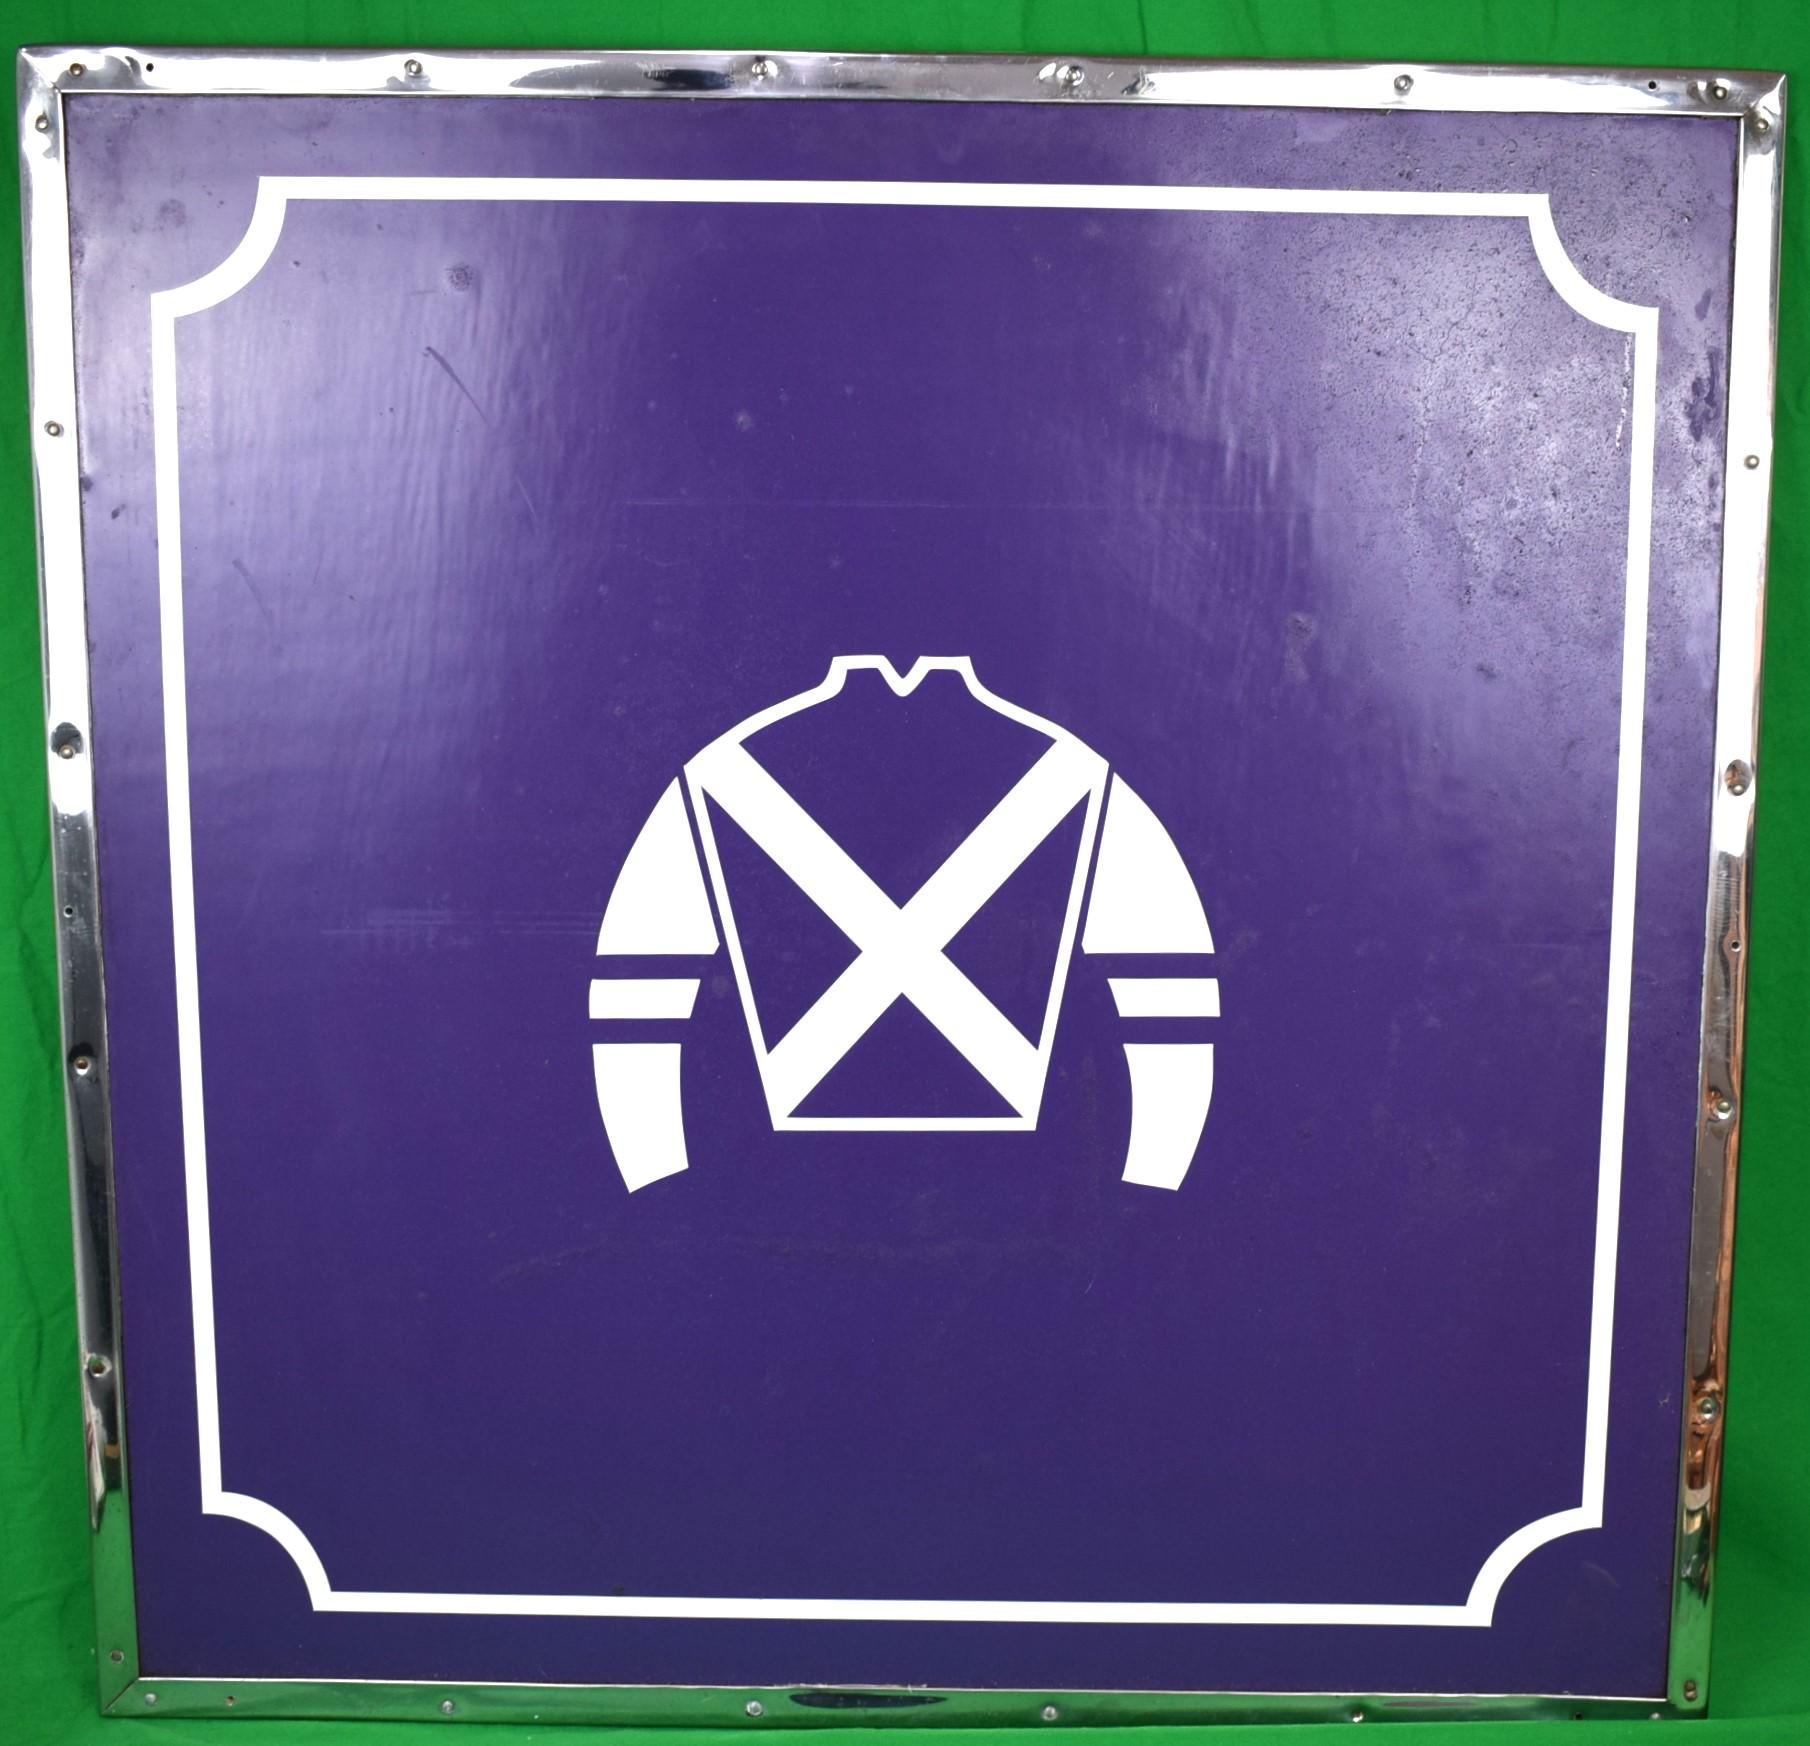 "Racing Stable Owner's Silkscreen Stable Sign" - Art by Unknown